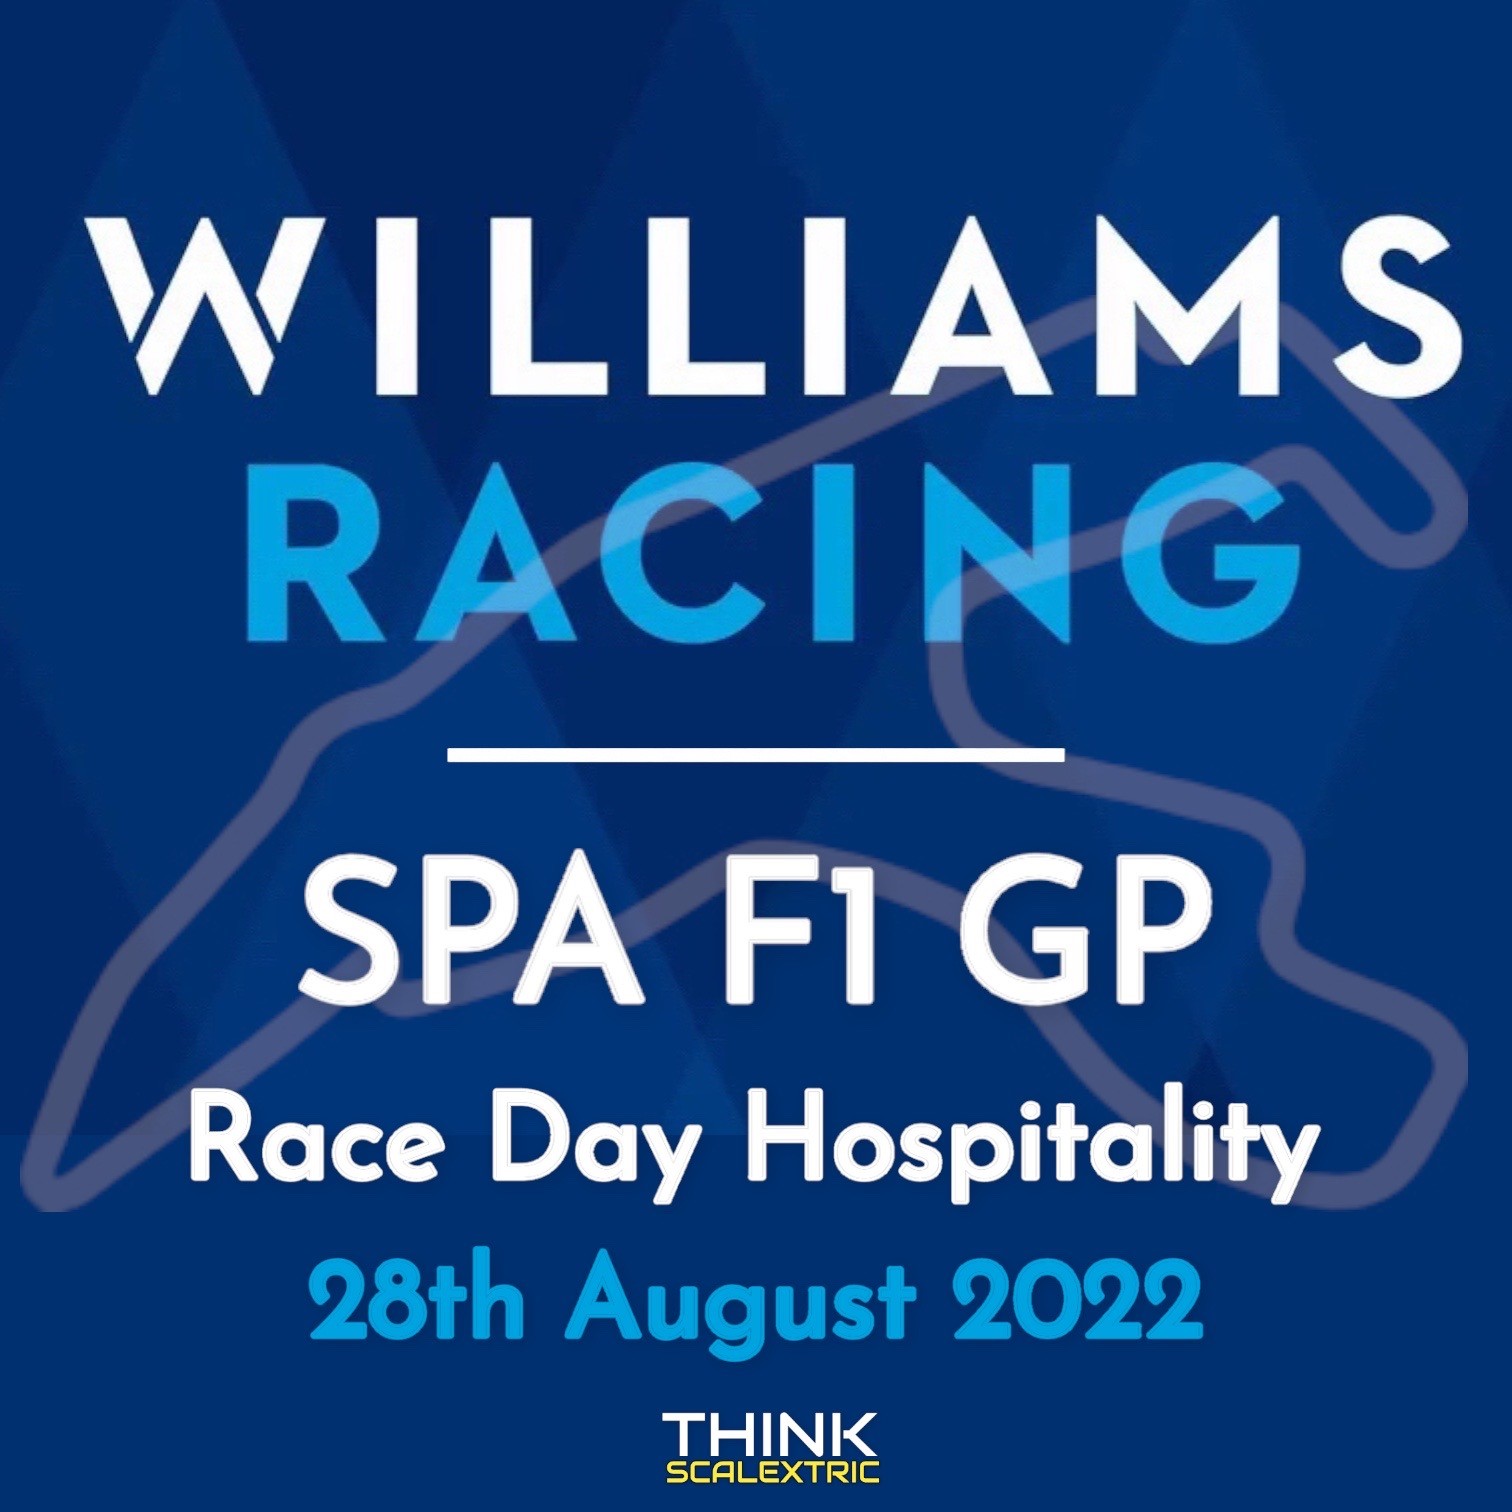 williams racing race day hospitality spa f1 gp 2022 giant scalextric bespoke track build